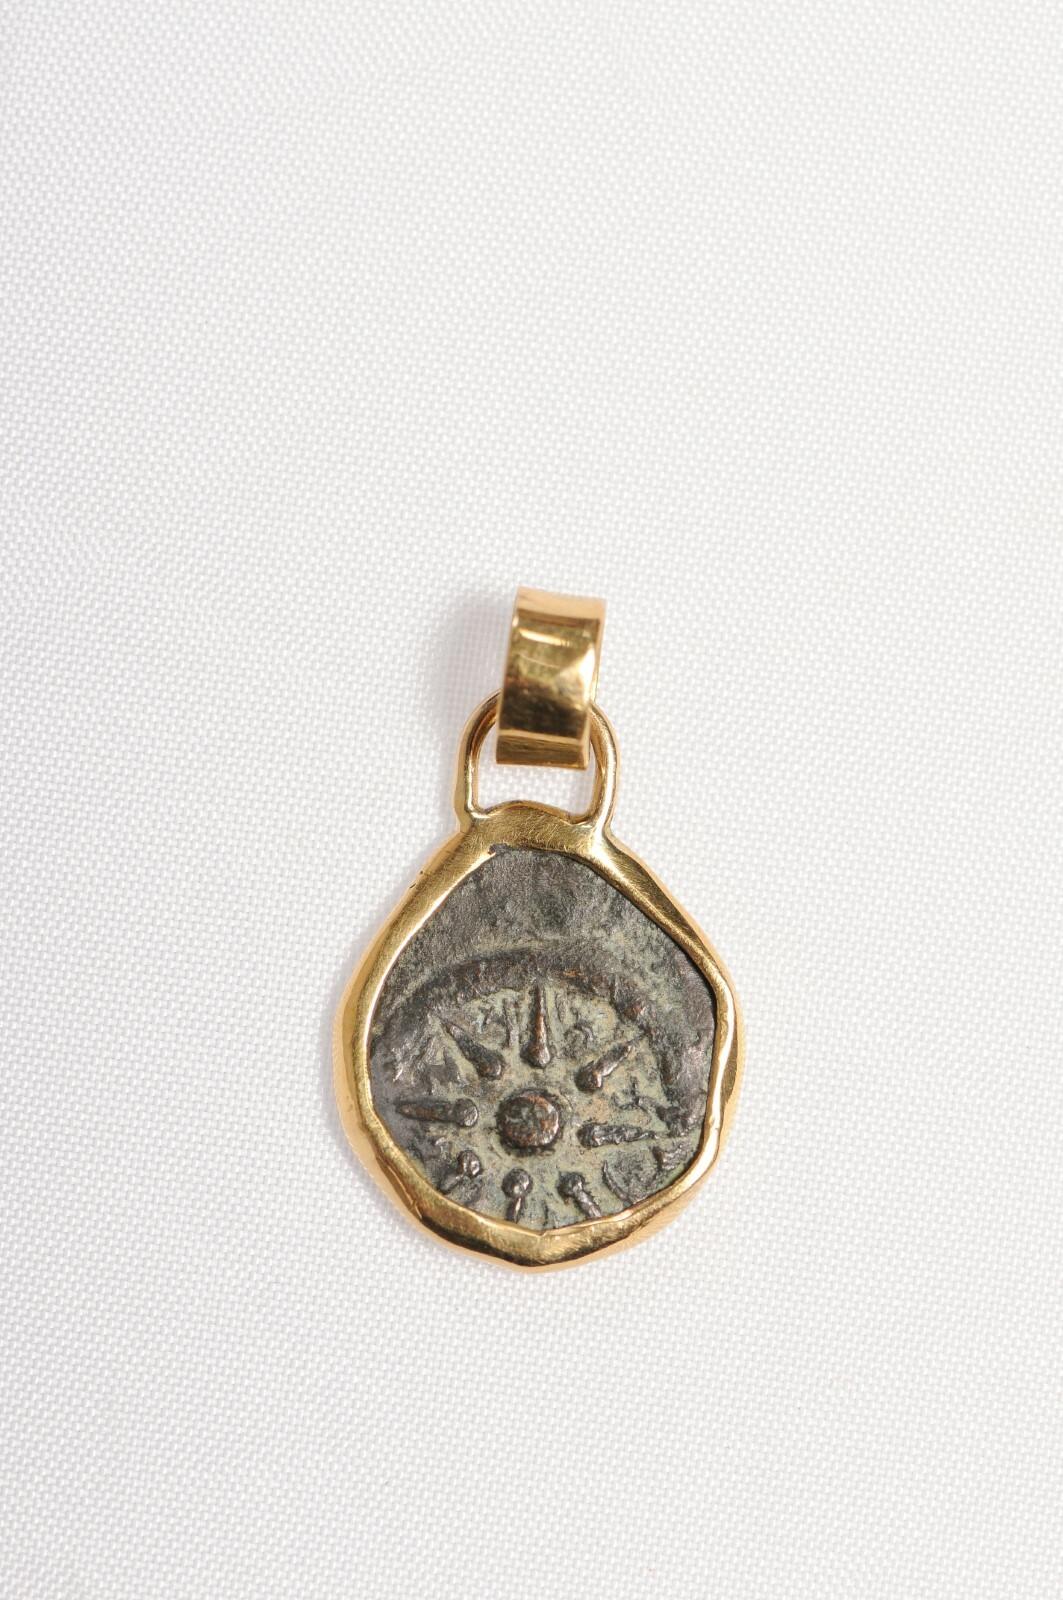 Classical Greek Widow Mite Coin Pendant in 18 Kt gold For Sale